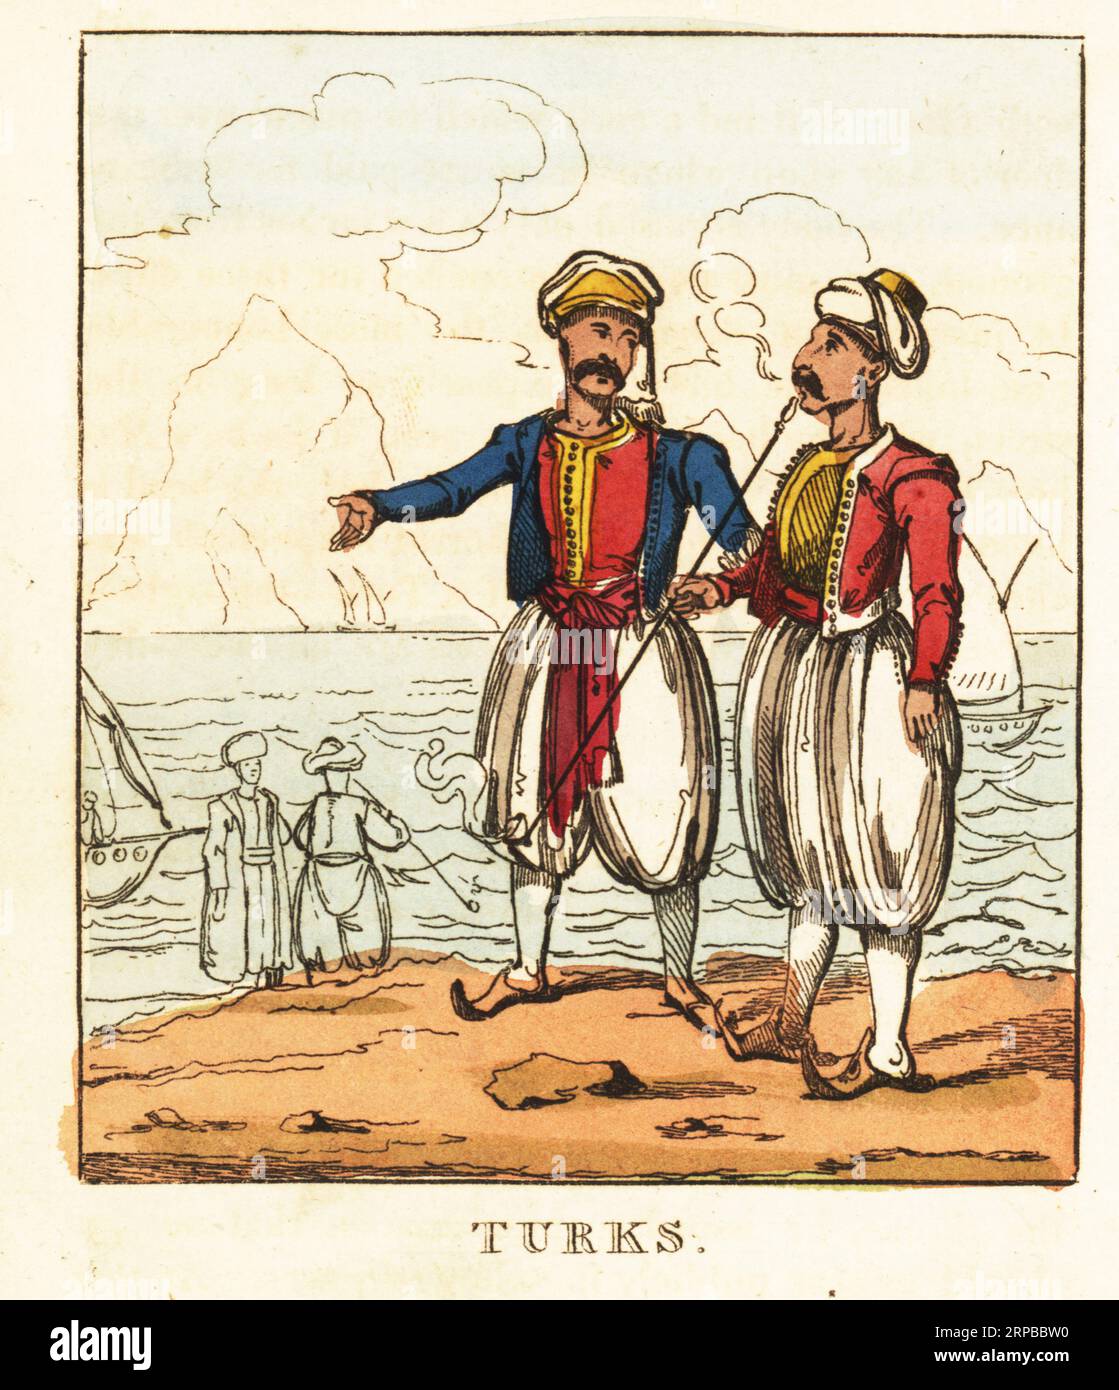 Costumes of Ottoman Turkey, 19th century. Two men in turban, jacket, waistcoat, sash, harem pants, stockings and slippers. One smokes a long tobacco pipe. Handcoloured copperplate engraving from The World in Miniature, or Panorama of the Costumes, Manners & Customs of All Nations, John Bysh, London, 1825. Stock Photo